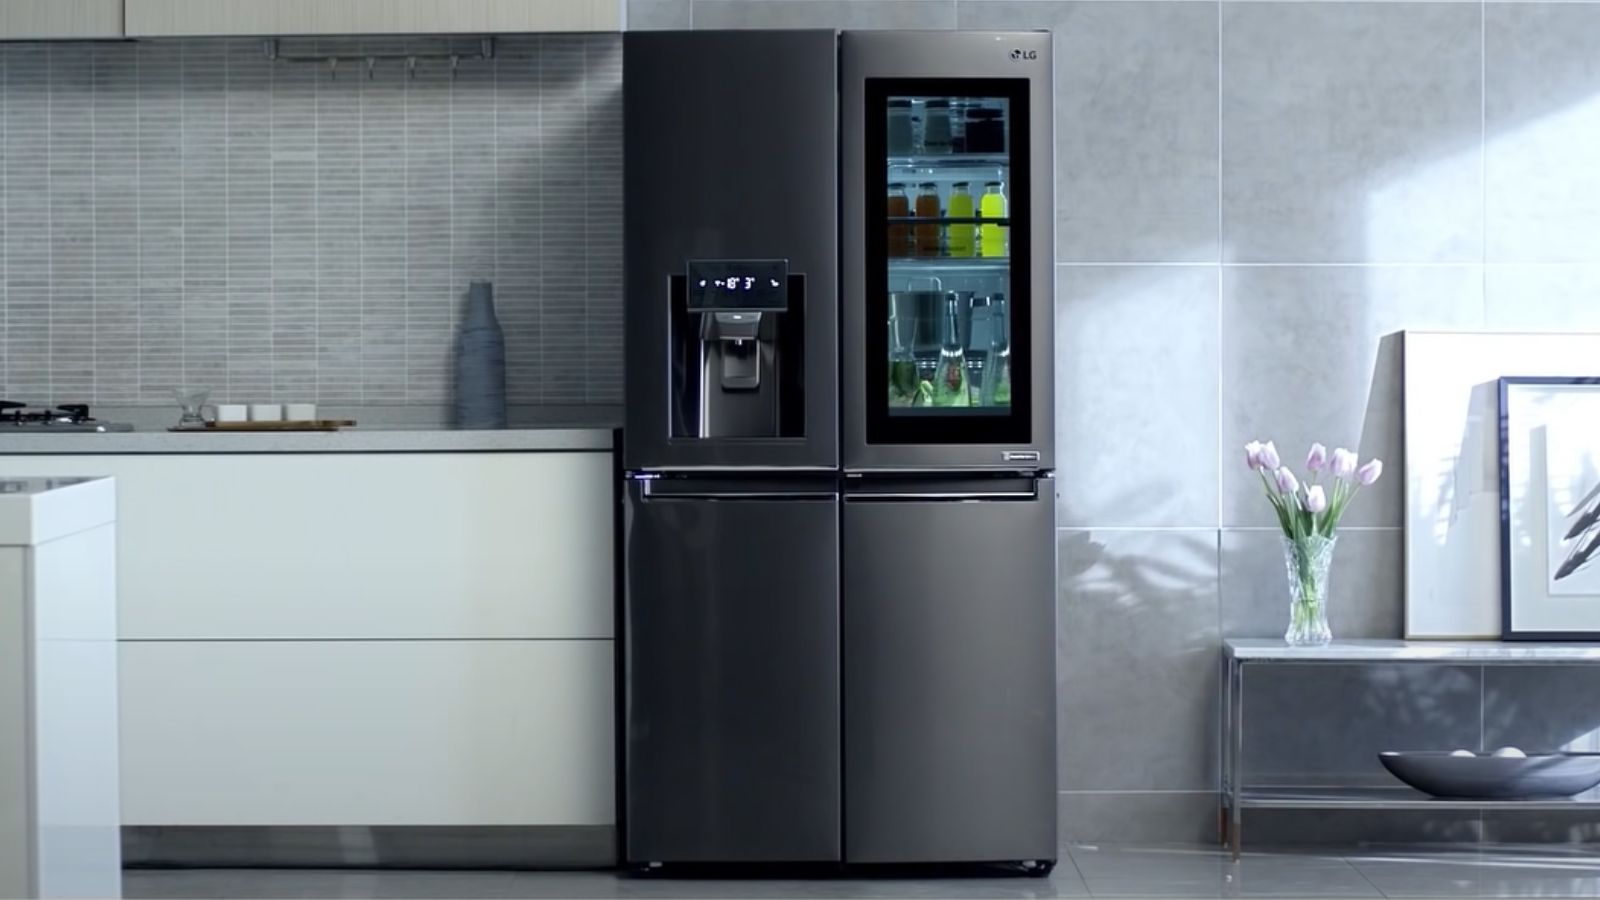 Hands On With LG's Cool New Smart Refrigerator